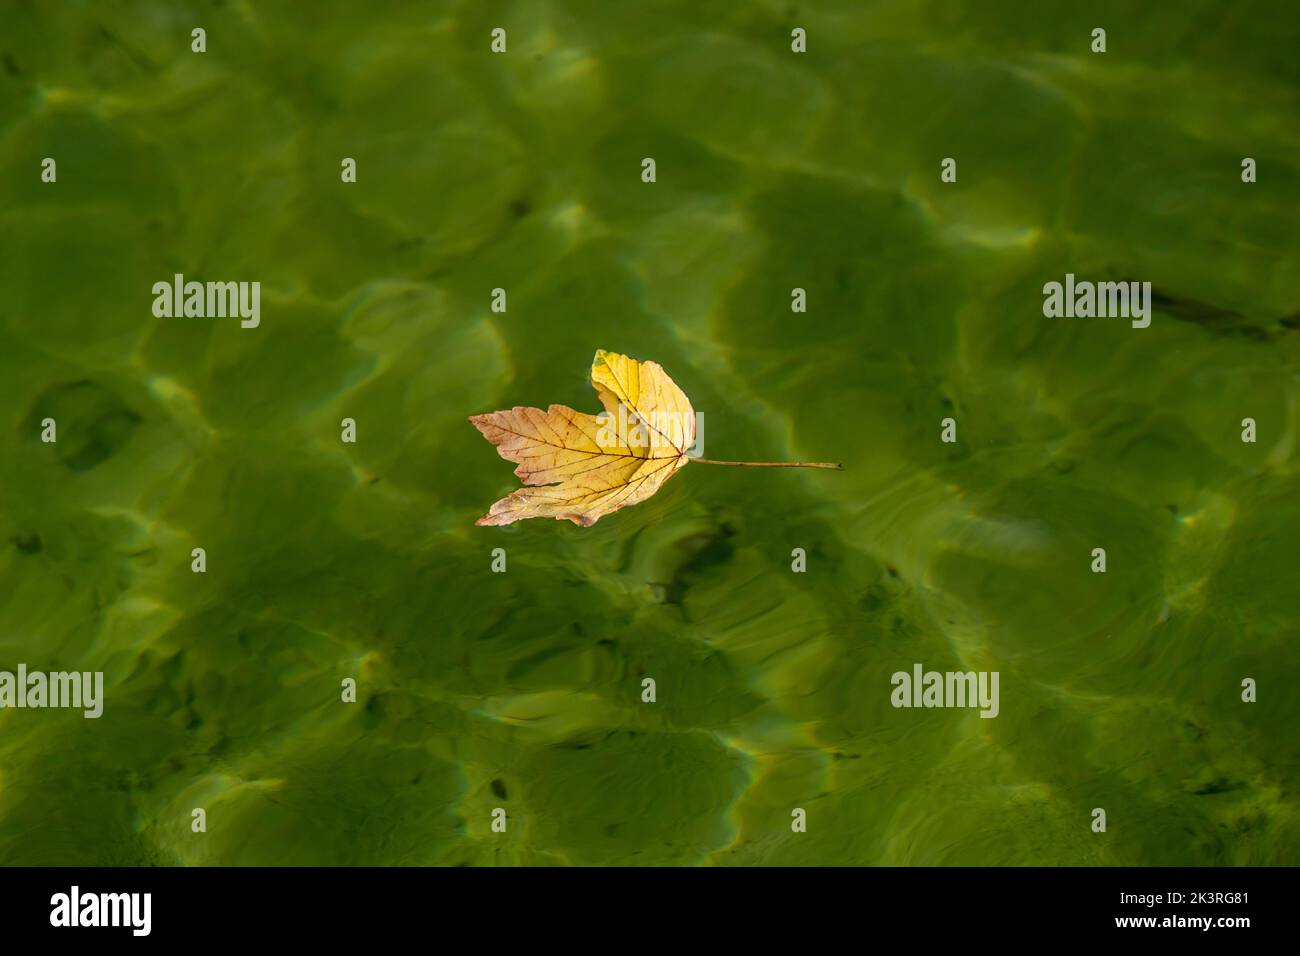 Sycamore Maple.  Acer pseudoplatanus  leaf floating on water with copyspace, Abington Park, Boating lake, Northampton, UK. Stock Photo